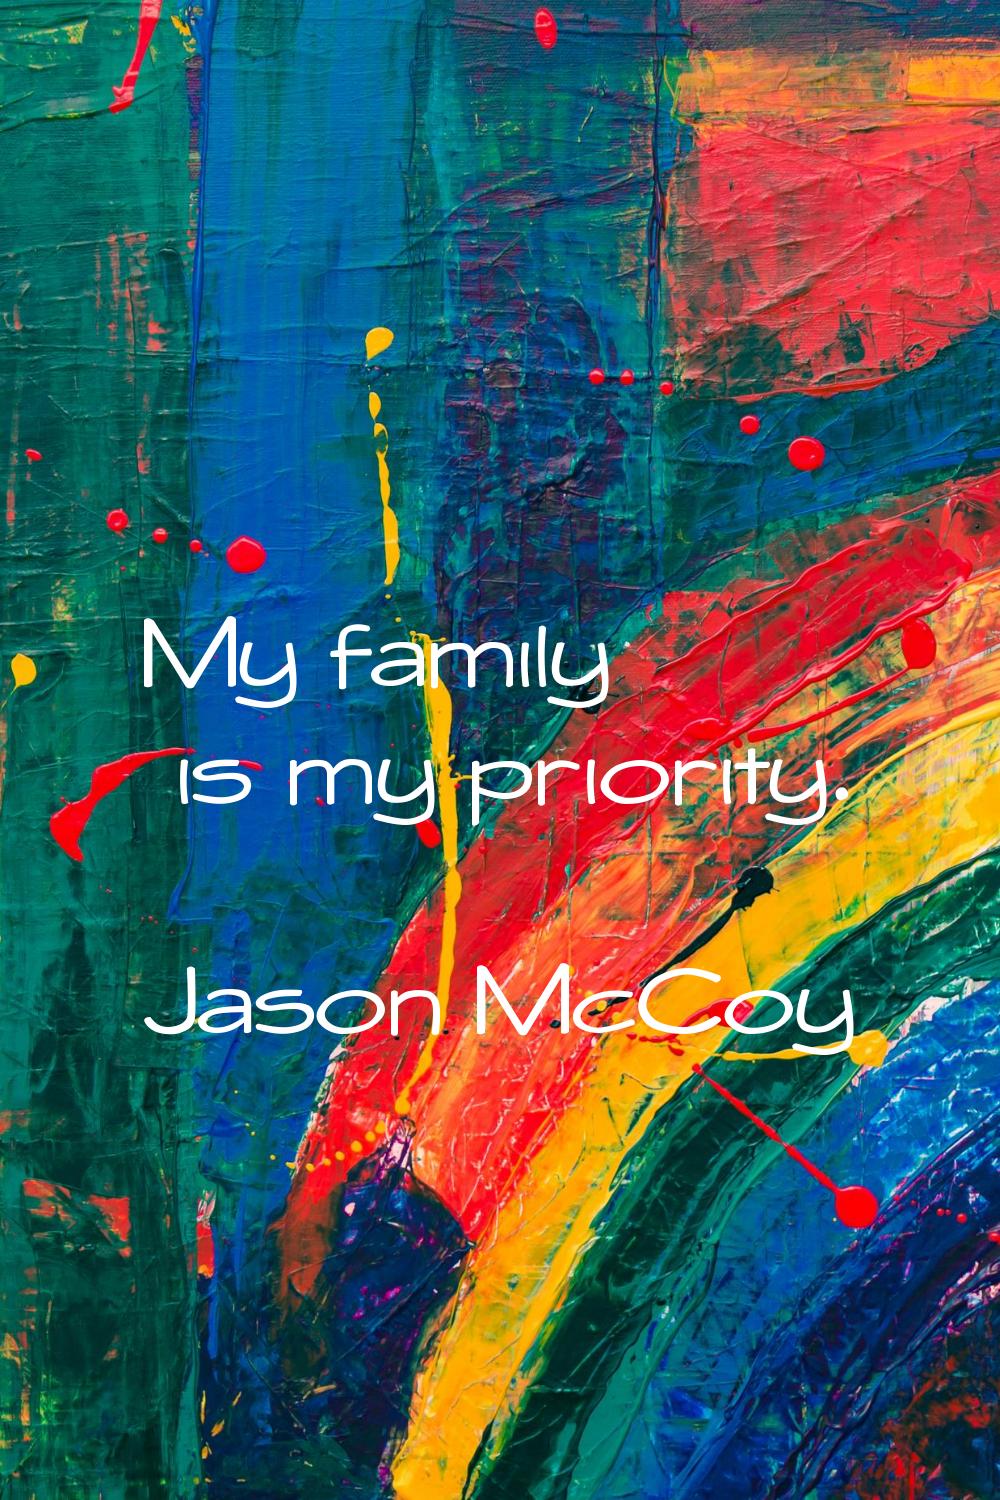 My family is my priority.